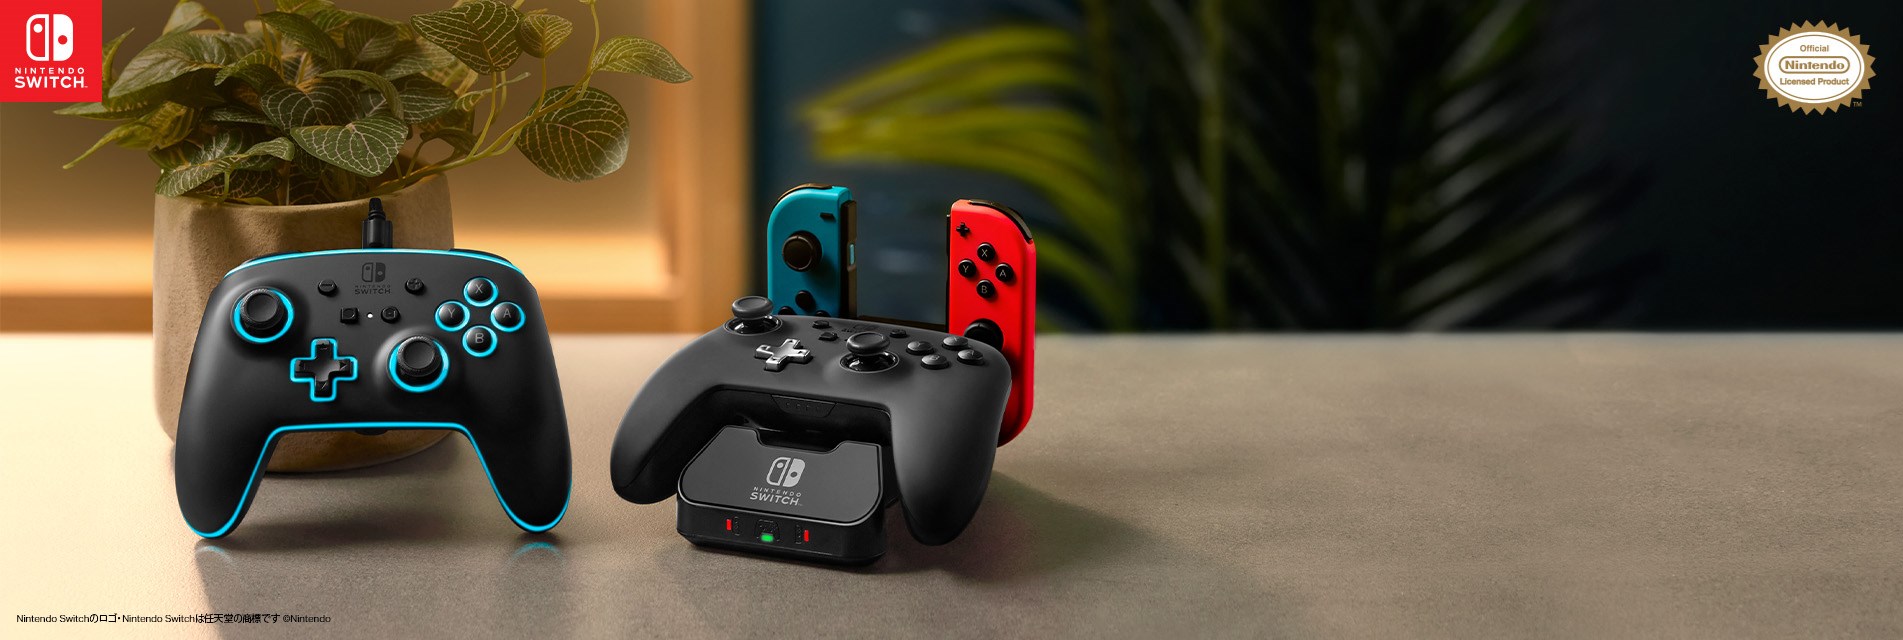 Nintendo Switch controller and charging station on a cozy home background